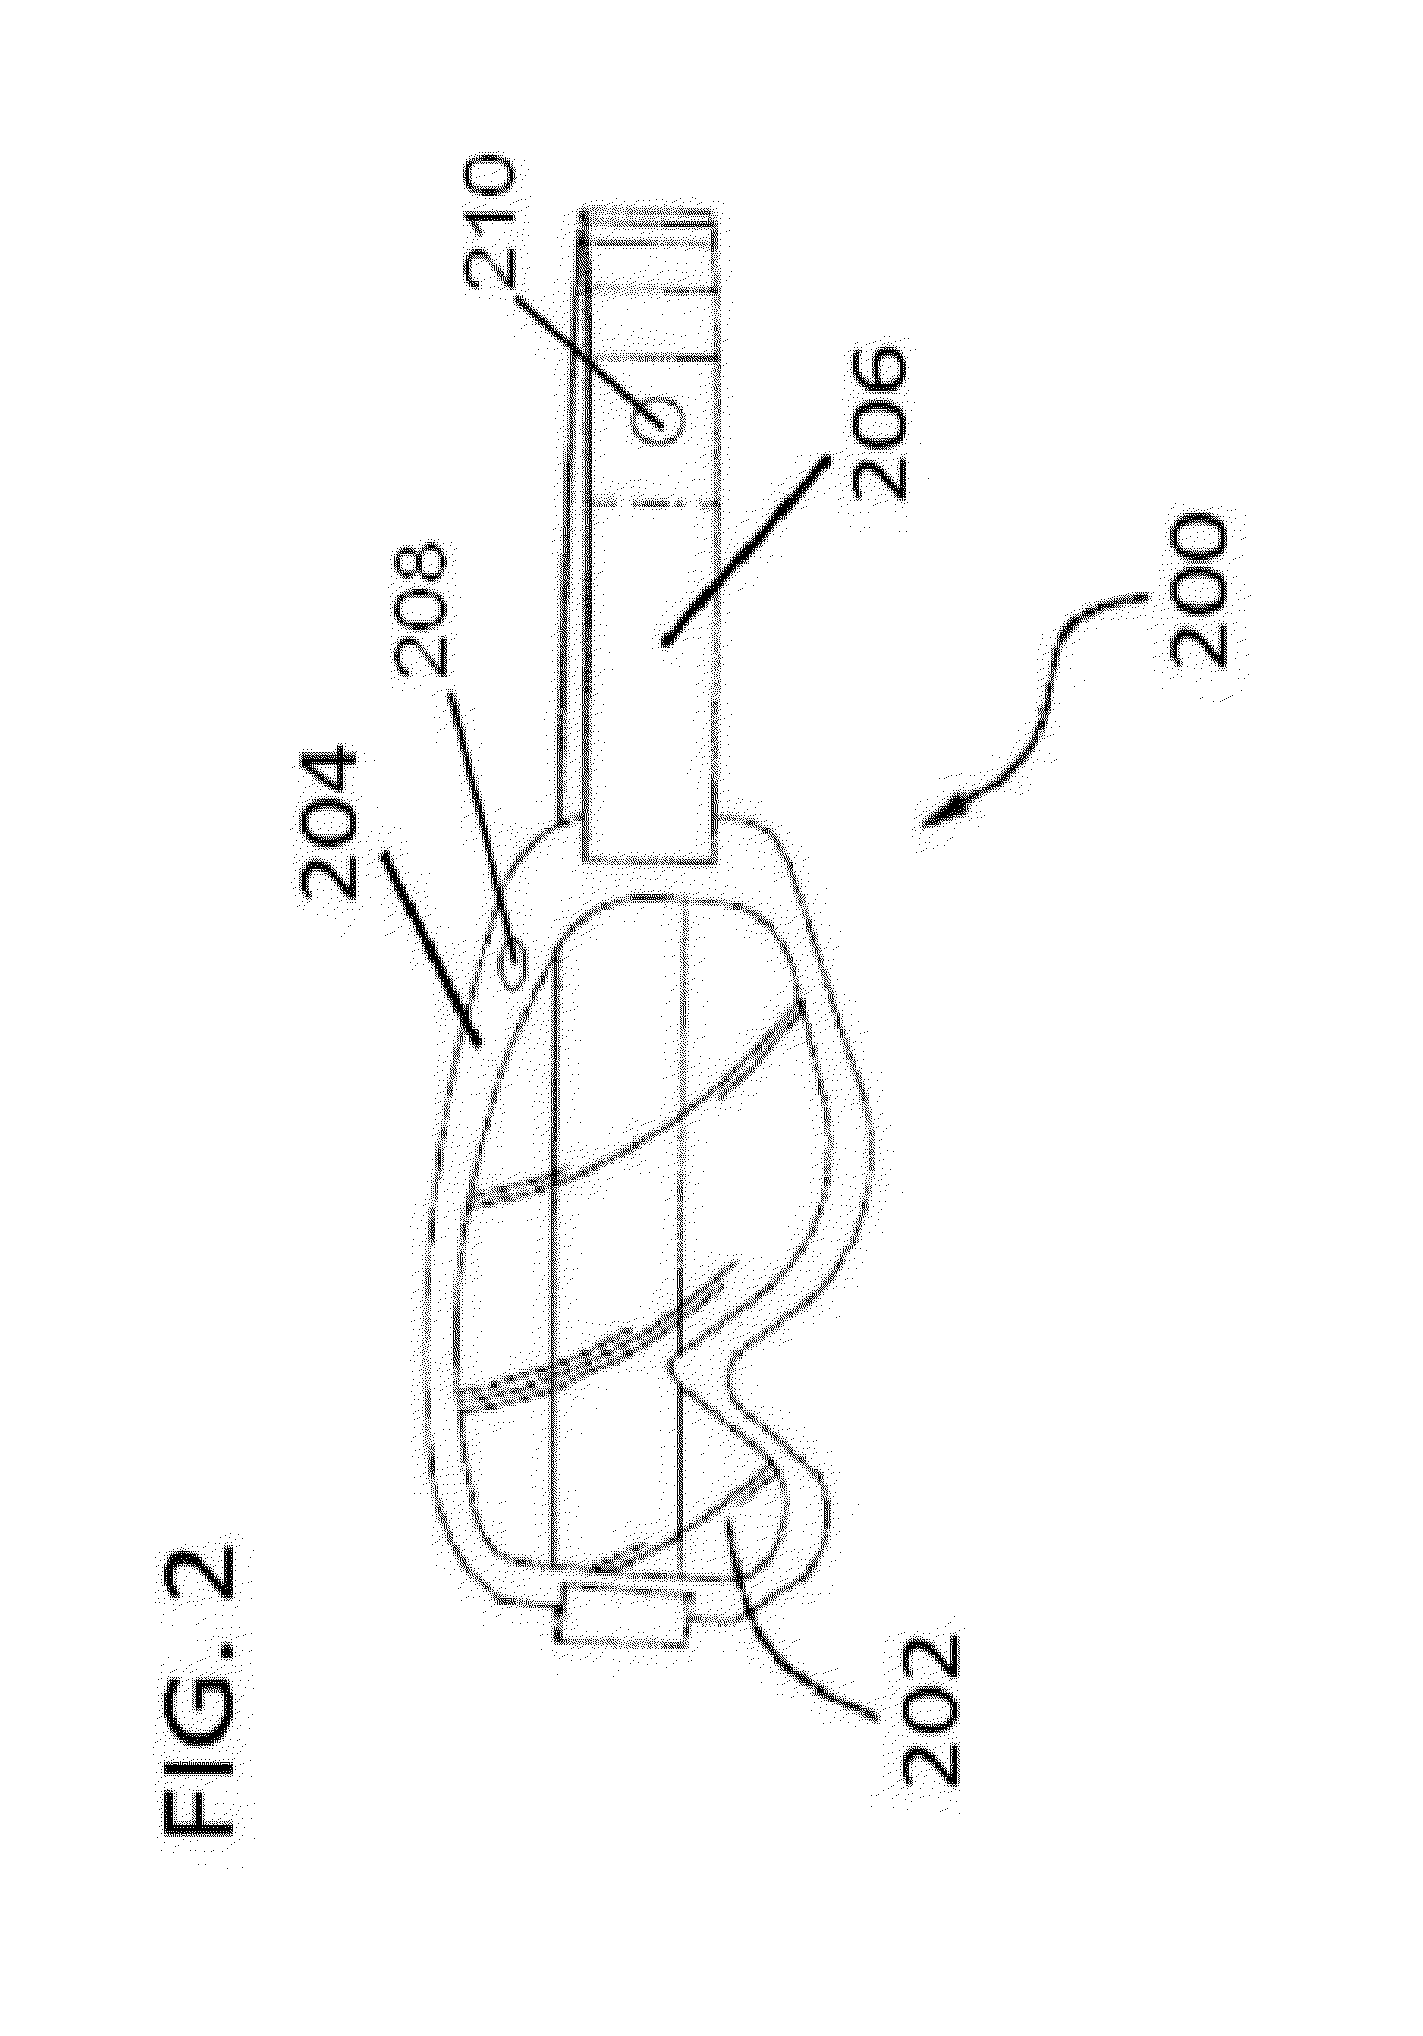 Wearable Monitoring and Training System for Focus and/or Mood